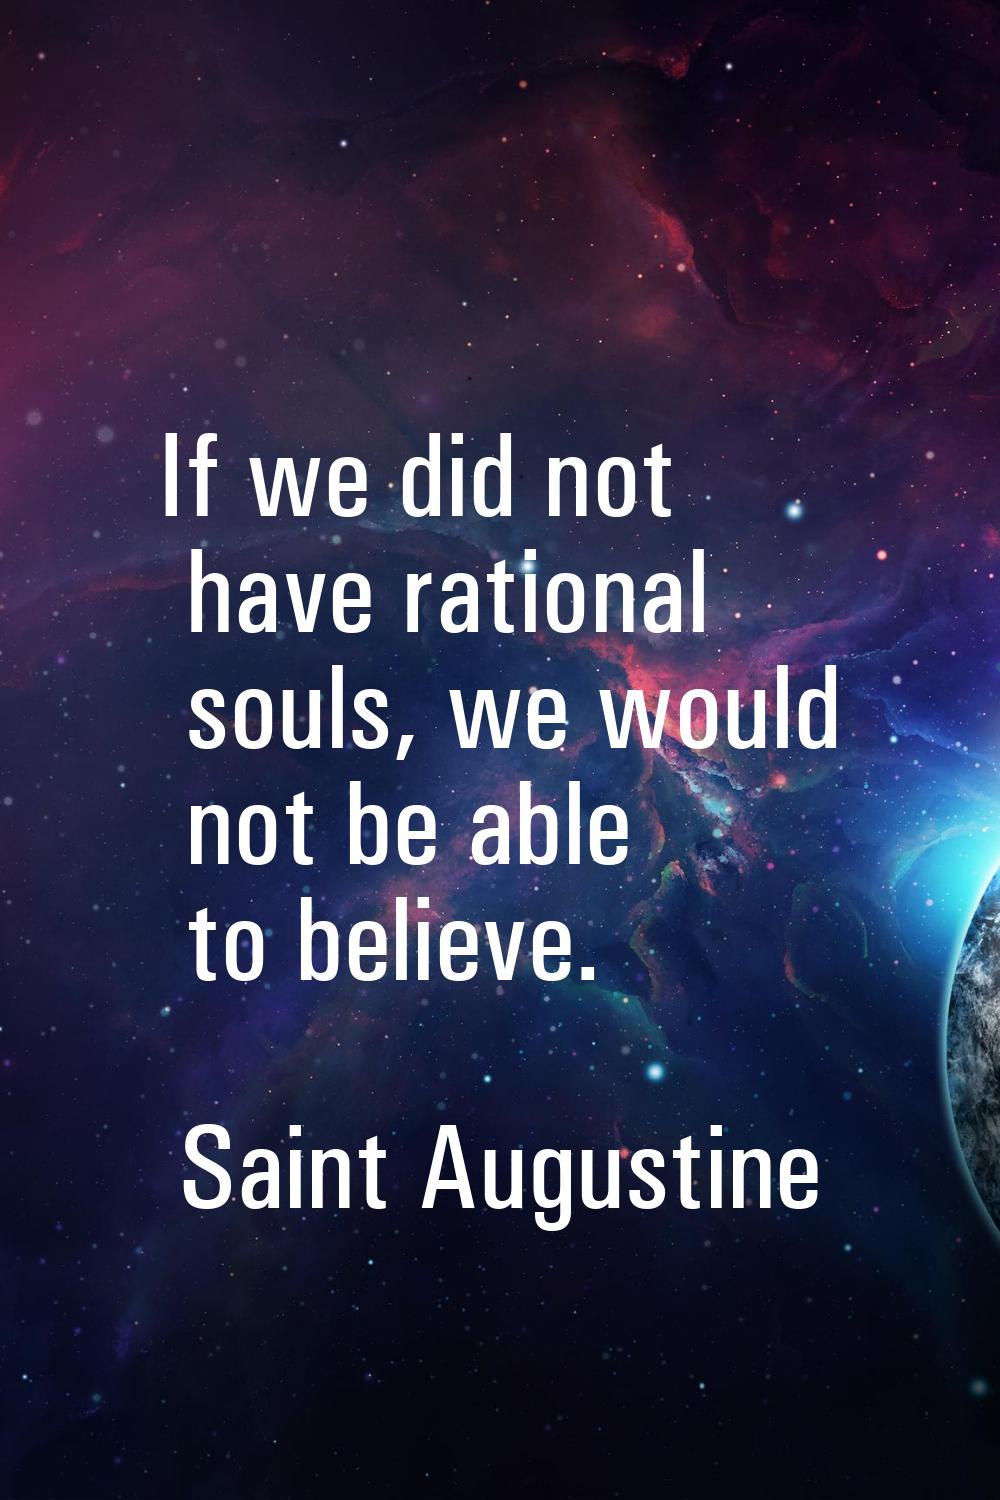 If we did not have rational souls, we would not be able to believe.